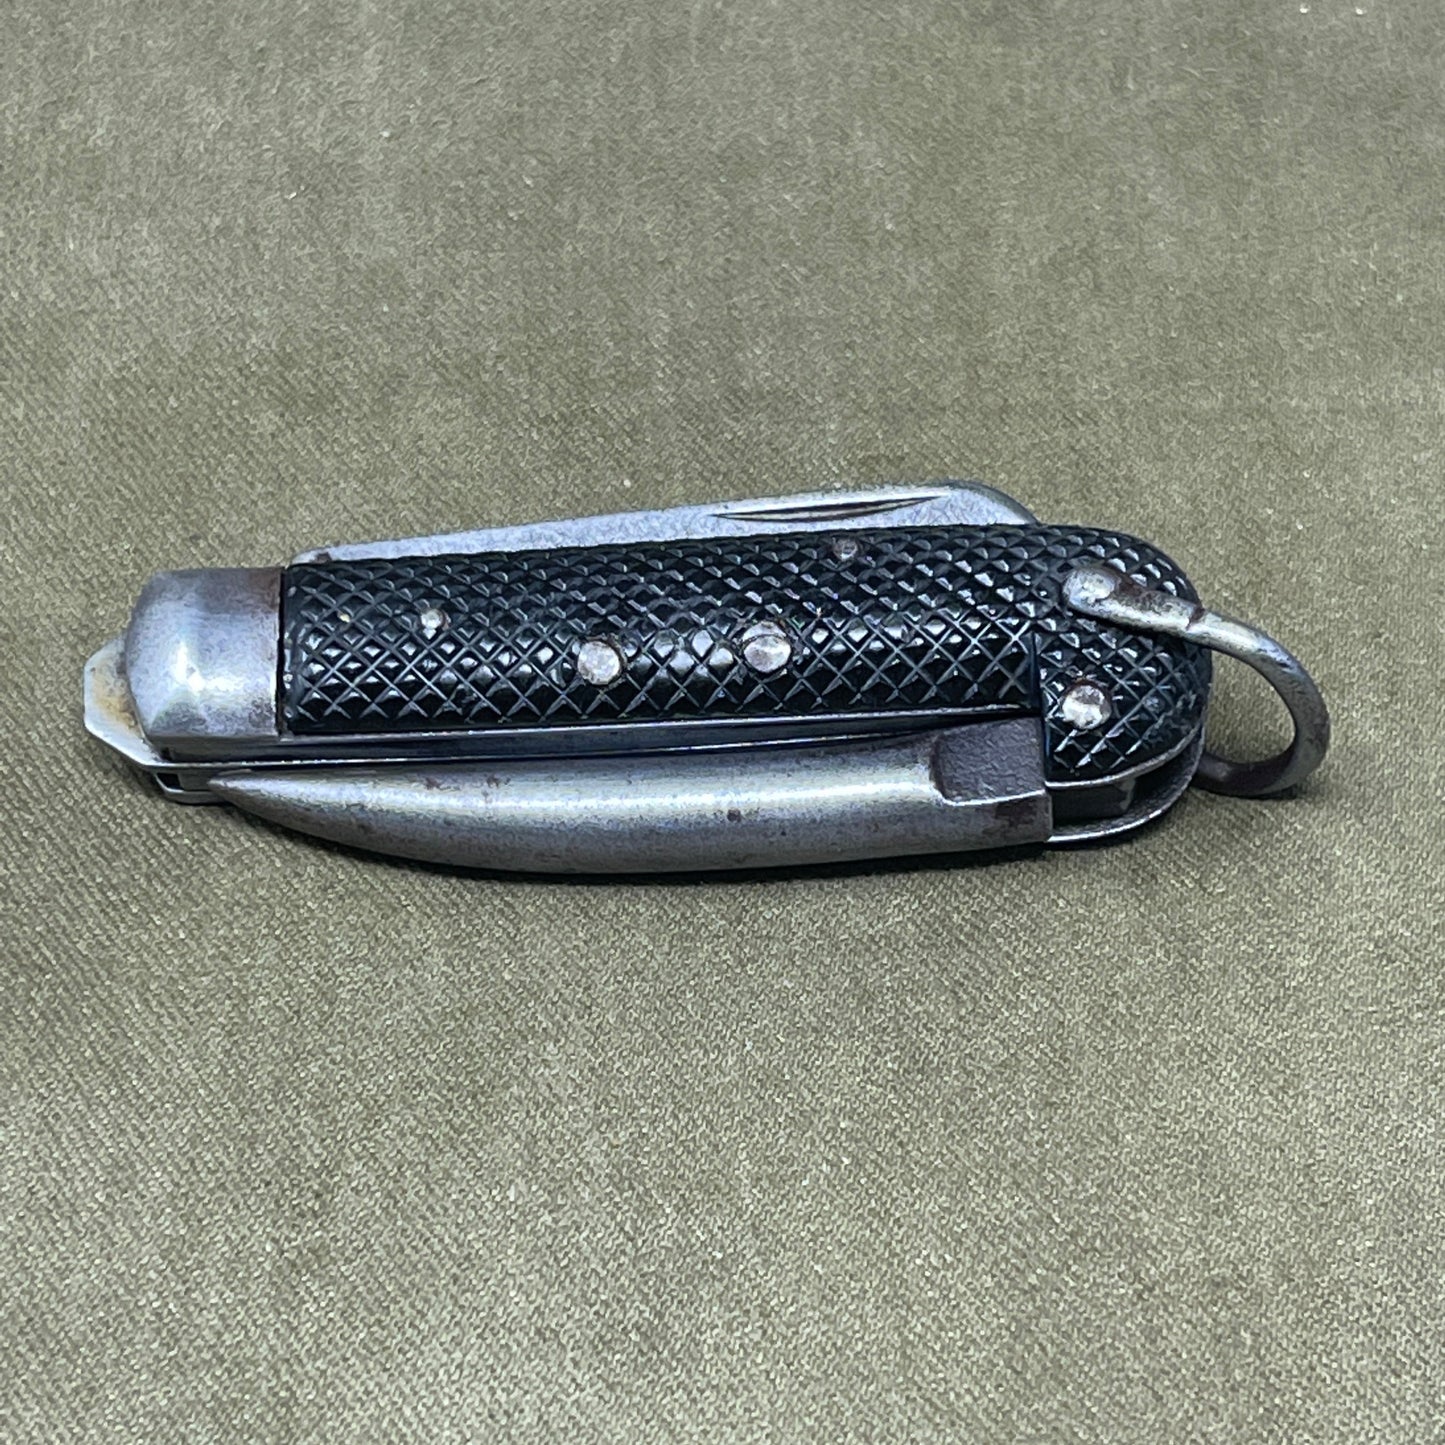 A nice example of a British 1942 Dated Pocket Jack Knife made by Clarke & Son of Sheffield  The blades are in good condition, the chequered Bakelite grip is intact and all the blades lock and close as they should. The steel can opener is in good condition